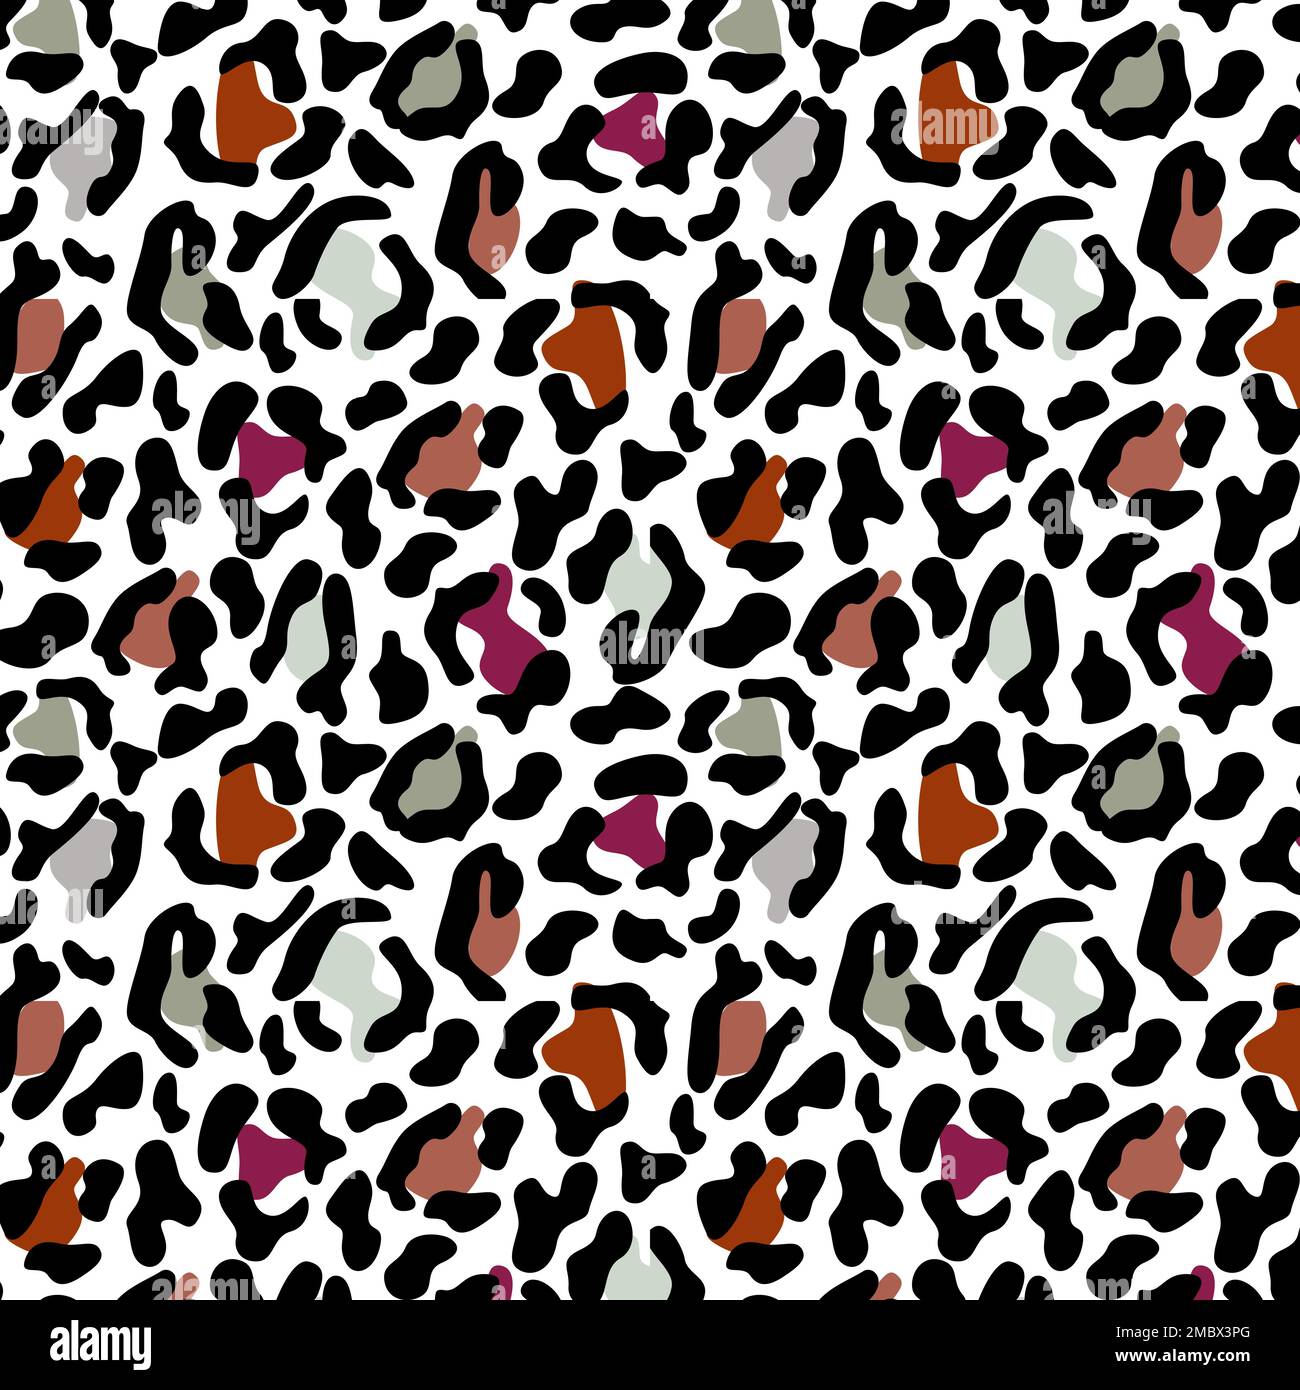 Leopard Cheetah Jaguar Skin Pattern With Brown, Coffee, Sage Green, Grey And Mauve Color Stock Vector